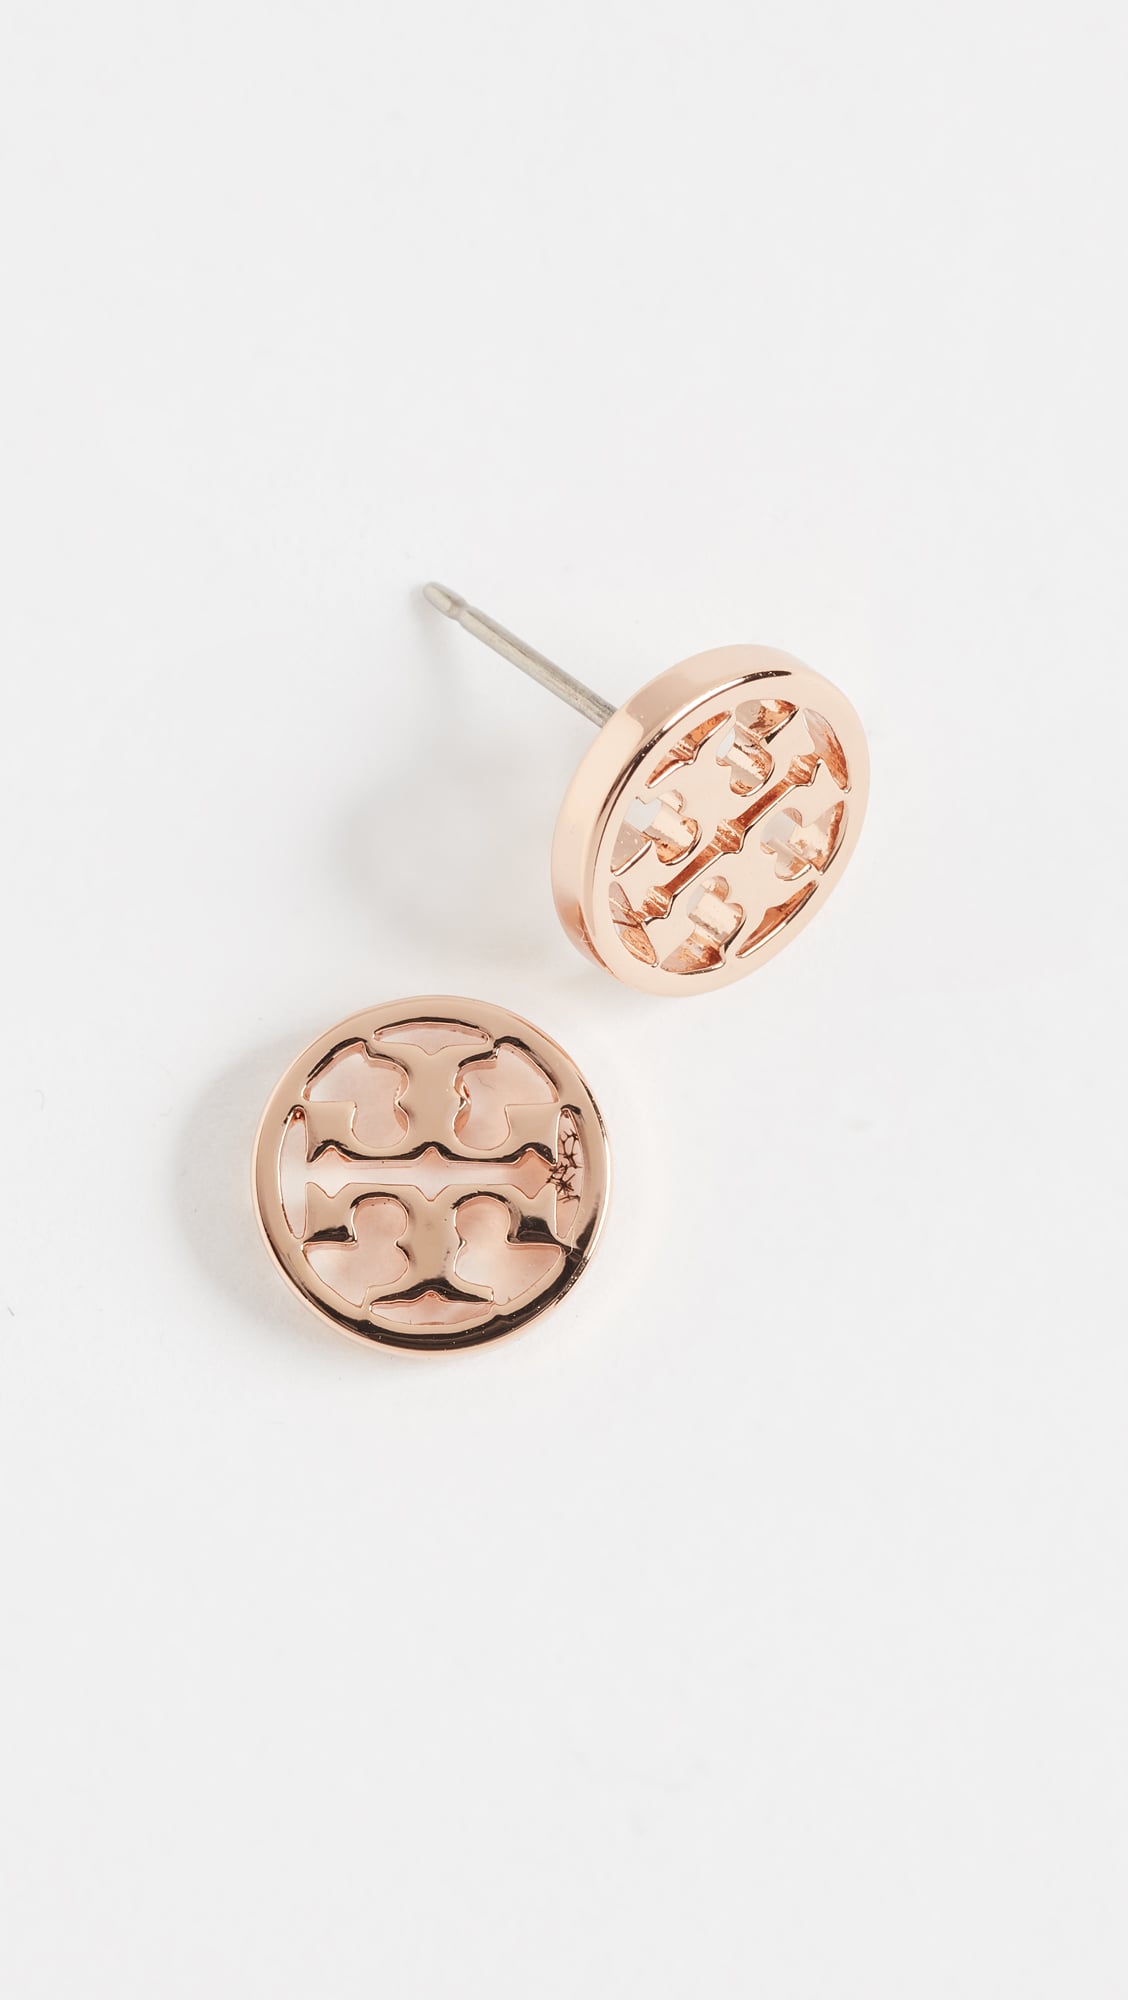 For Everyday Glam: Tory Burch Logo Circle Stud Earrings | 21 Rose Gold  Gifts So Stunning, You'll Have a Hard Time Not Keeping Them to Yourself |  POPSUGAR Fashion Photo 16